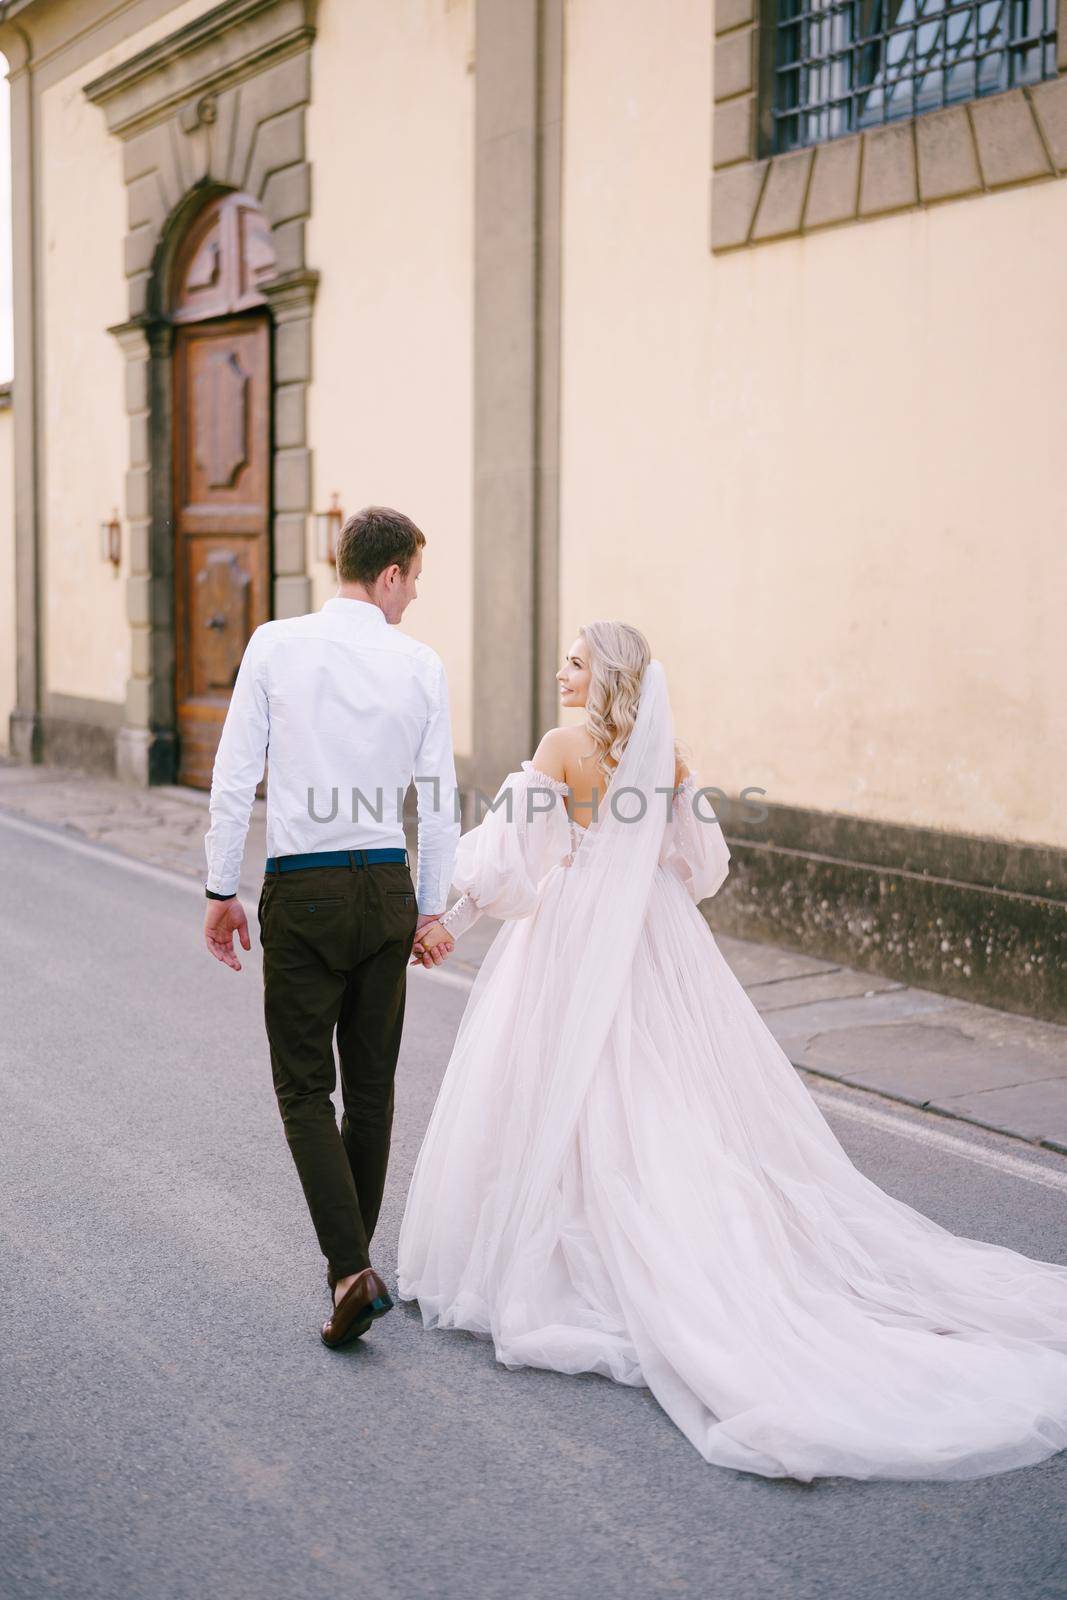 Beautiful bride and groom walking hand in hand away from the camera outside of the old villa in Italy, in Tuscany, near Florence.